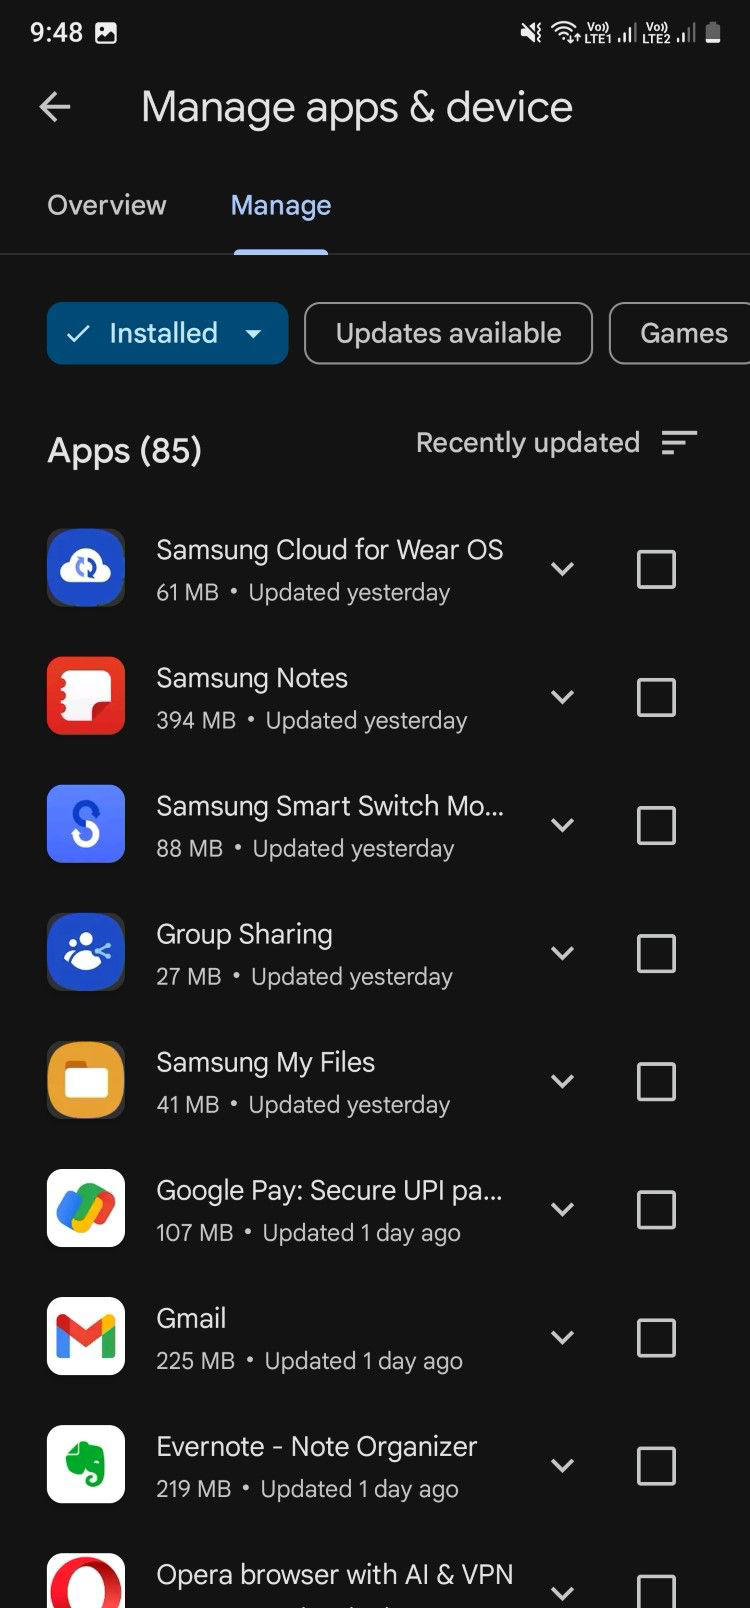 Play Store showing list of all installed apps